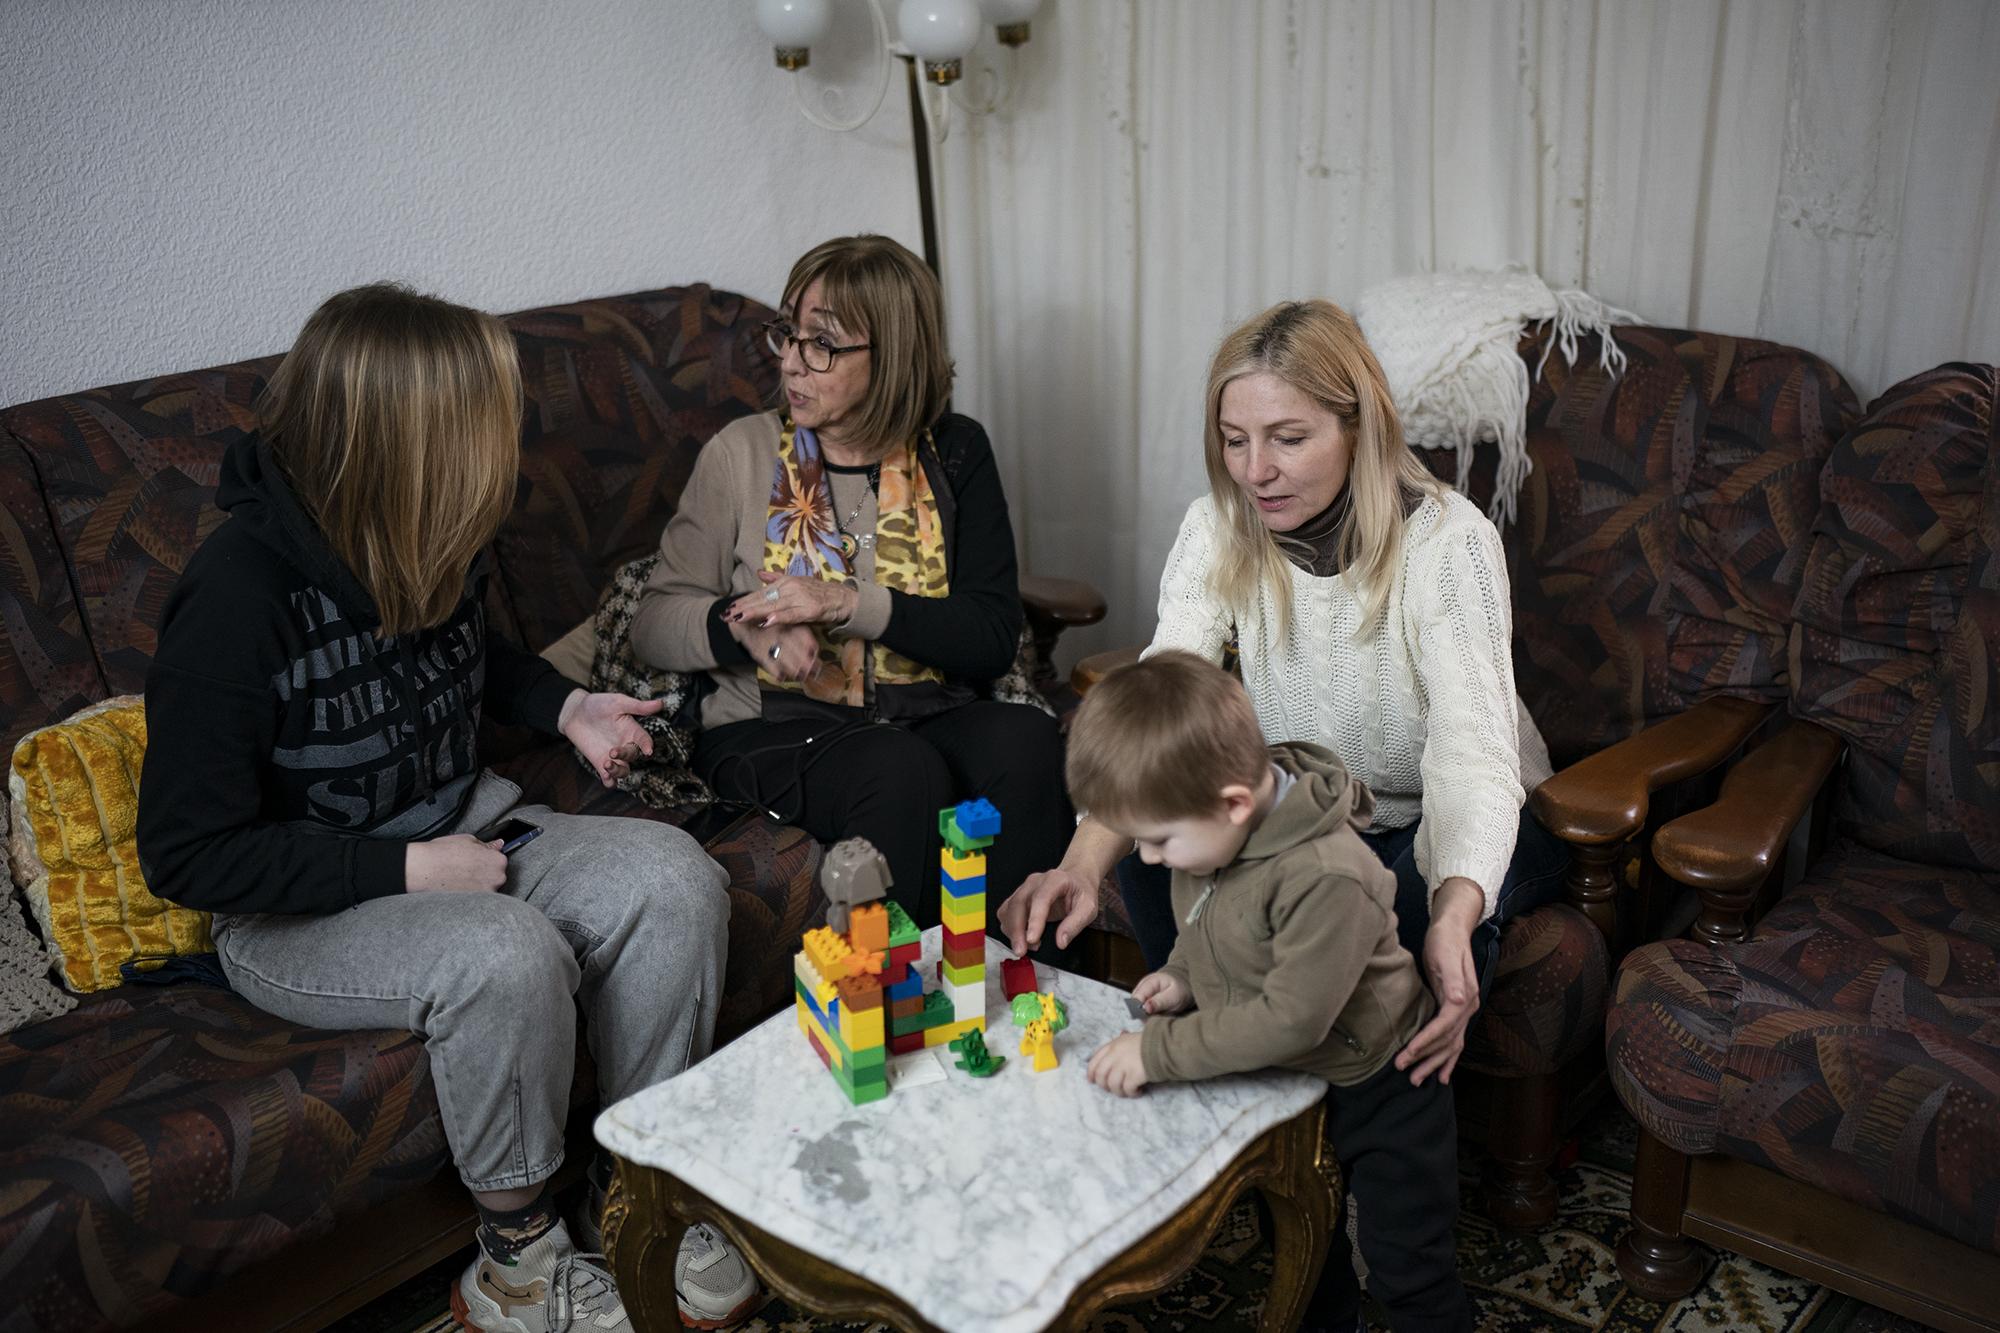 Ukrainian refugees sit in a home of a resident in the village of Guissona, Lleida, Spain, Thursday, March 17, 2022. (AP Photo/Joan Mateu Parra)